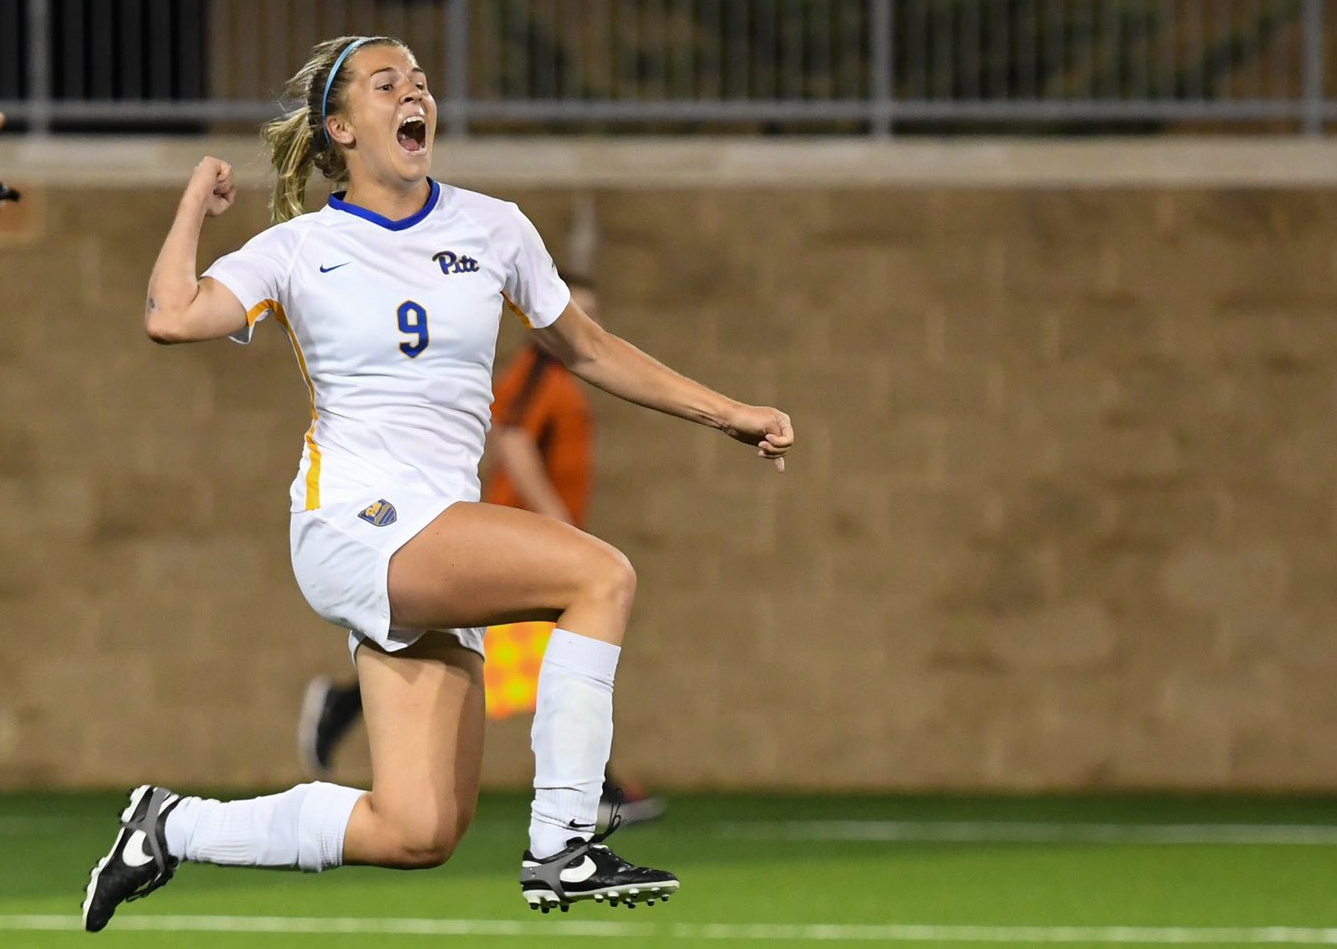 Amanda West becomes first Pitt women's player to earn All-ACC honors |  Pittsburgh Soccer Now